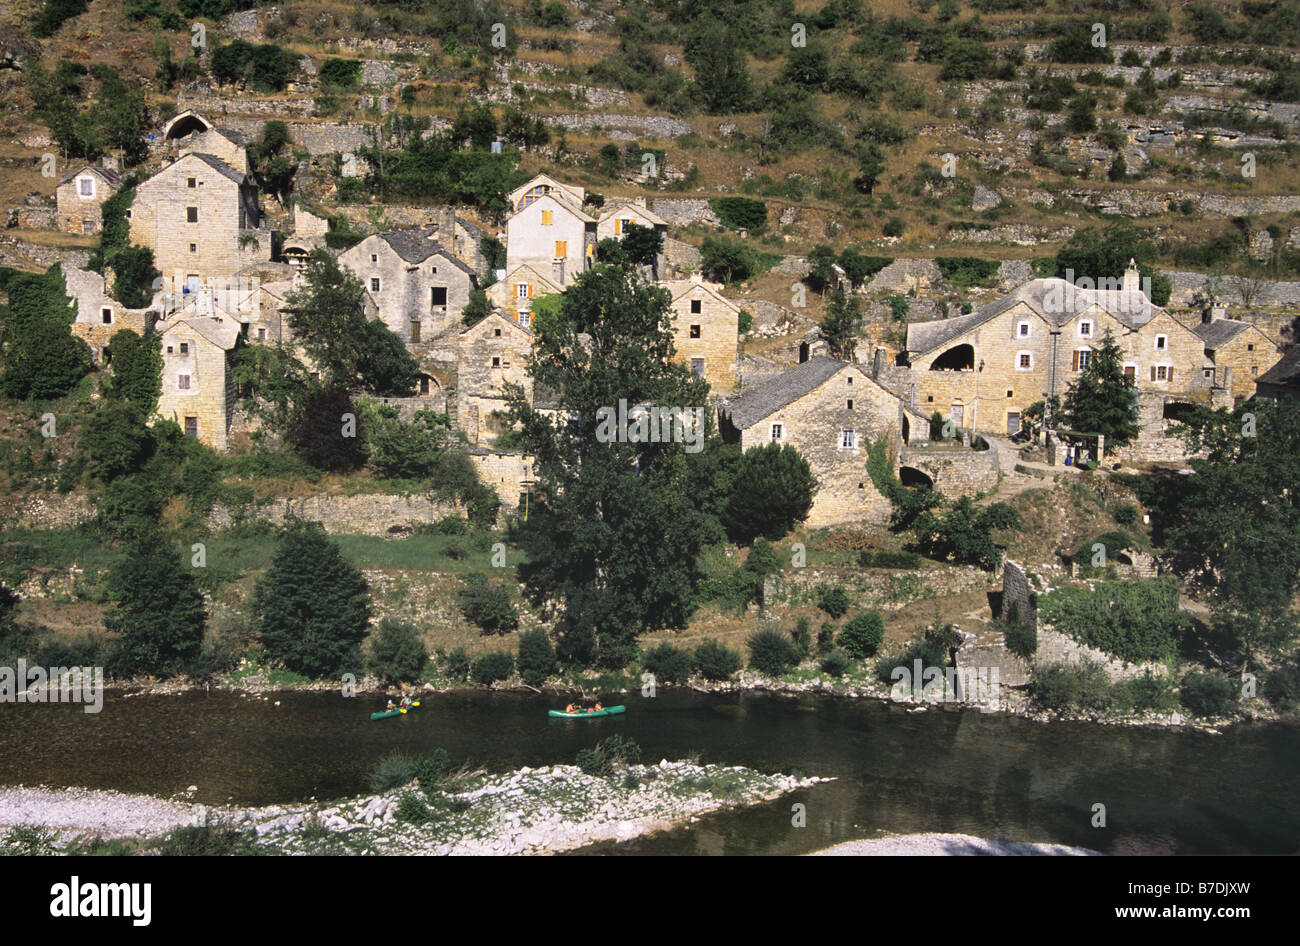 Stone Houses at Hauterives, a Restored Hamlet with No Road Access, on left bank of the Tarn River, Gorges du Tarn, Lozère,France Stock Photo